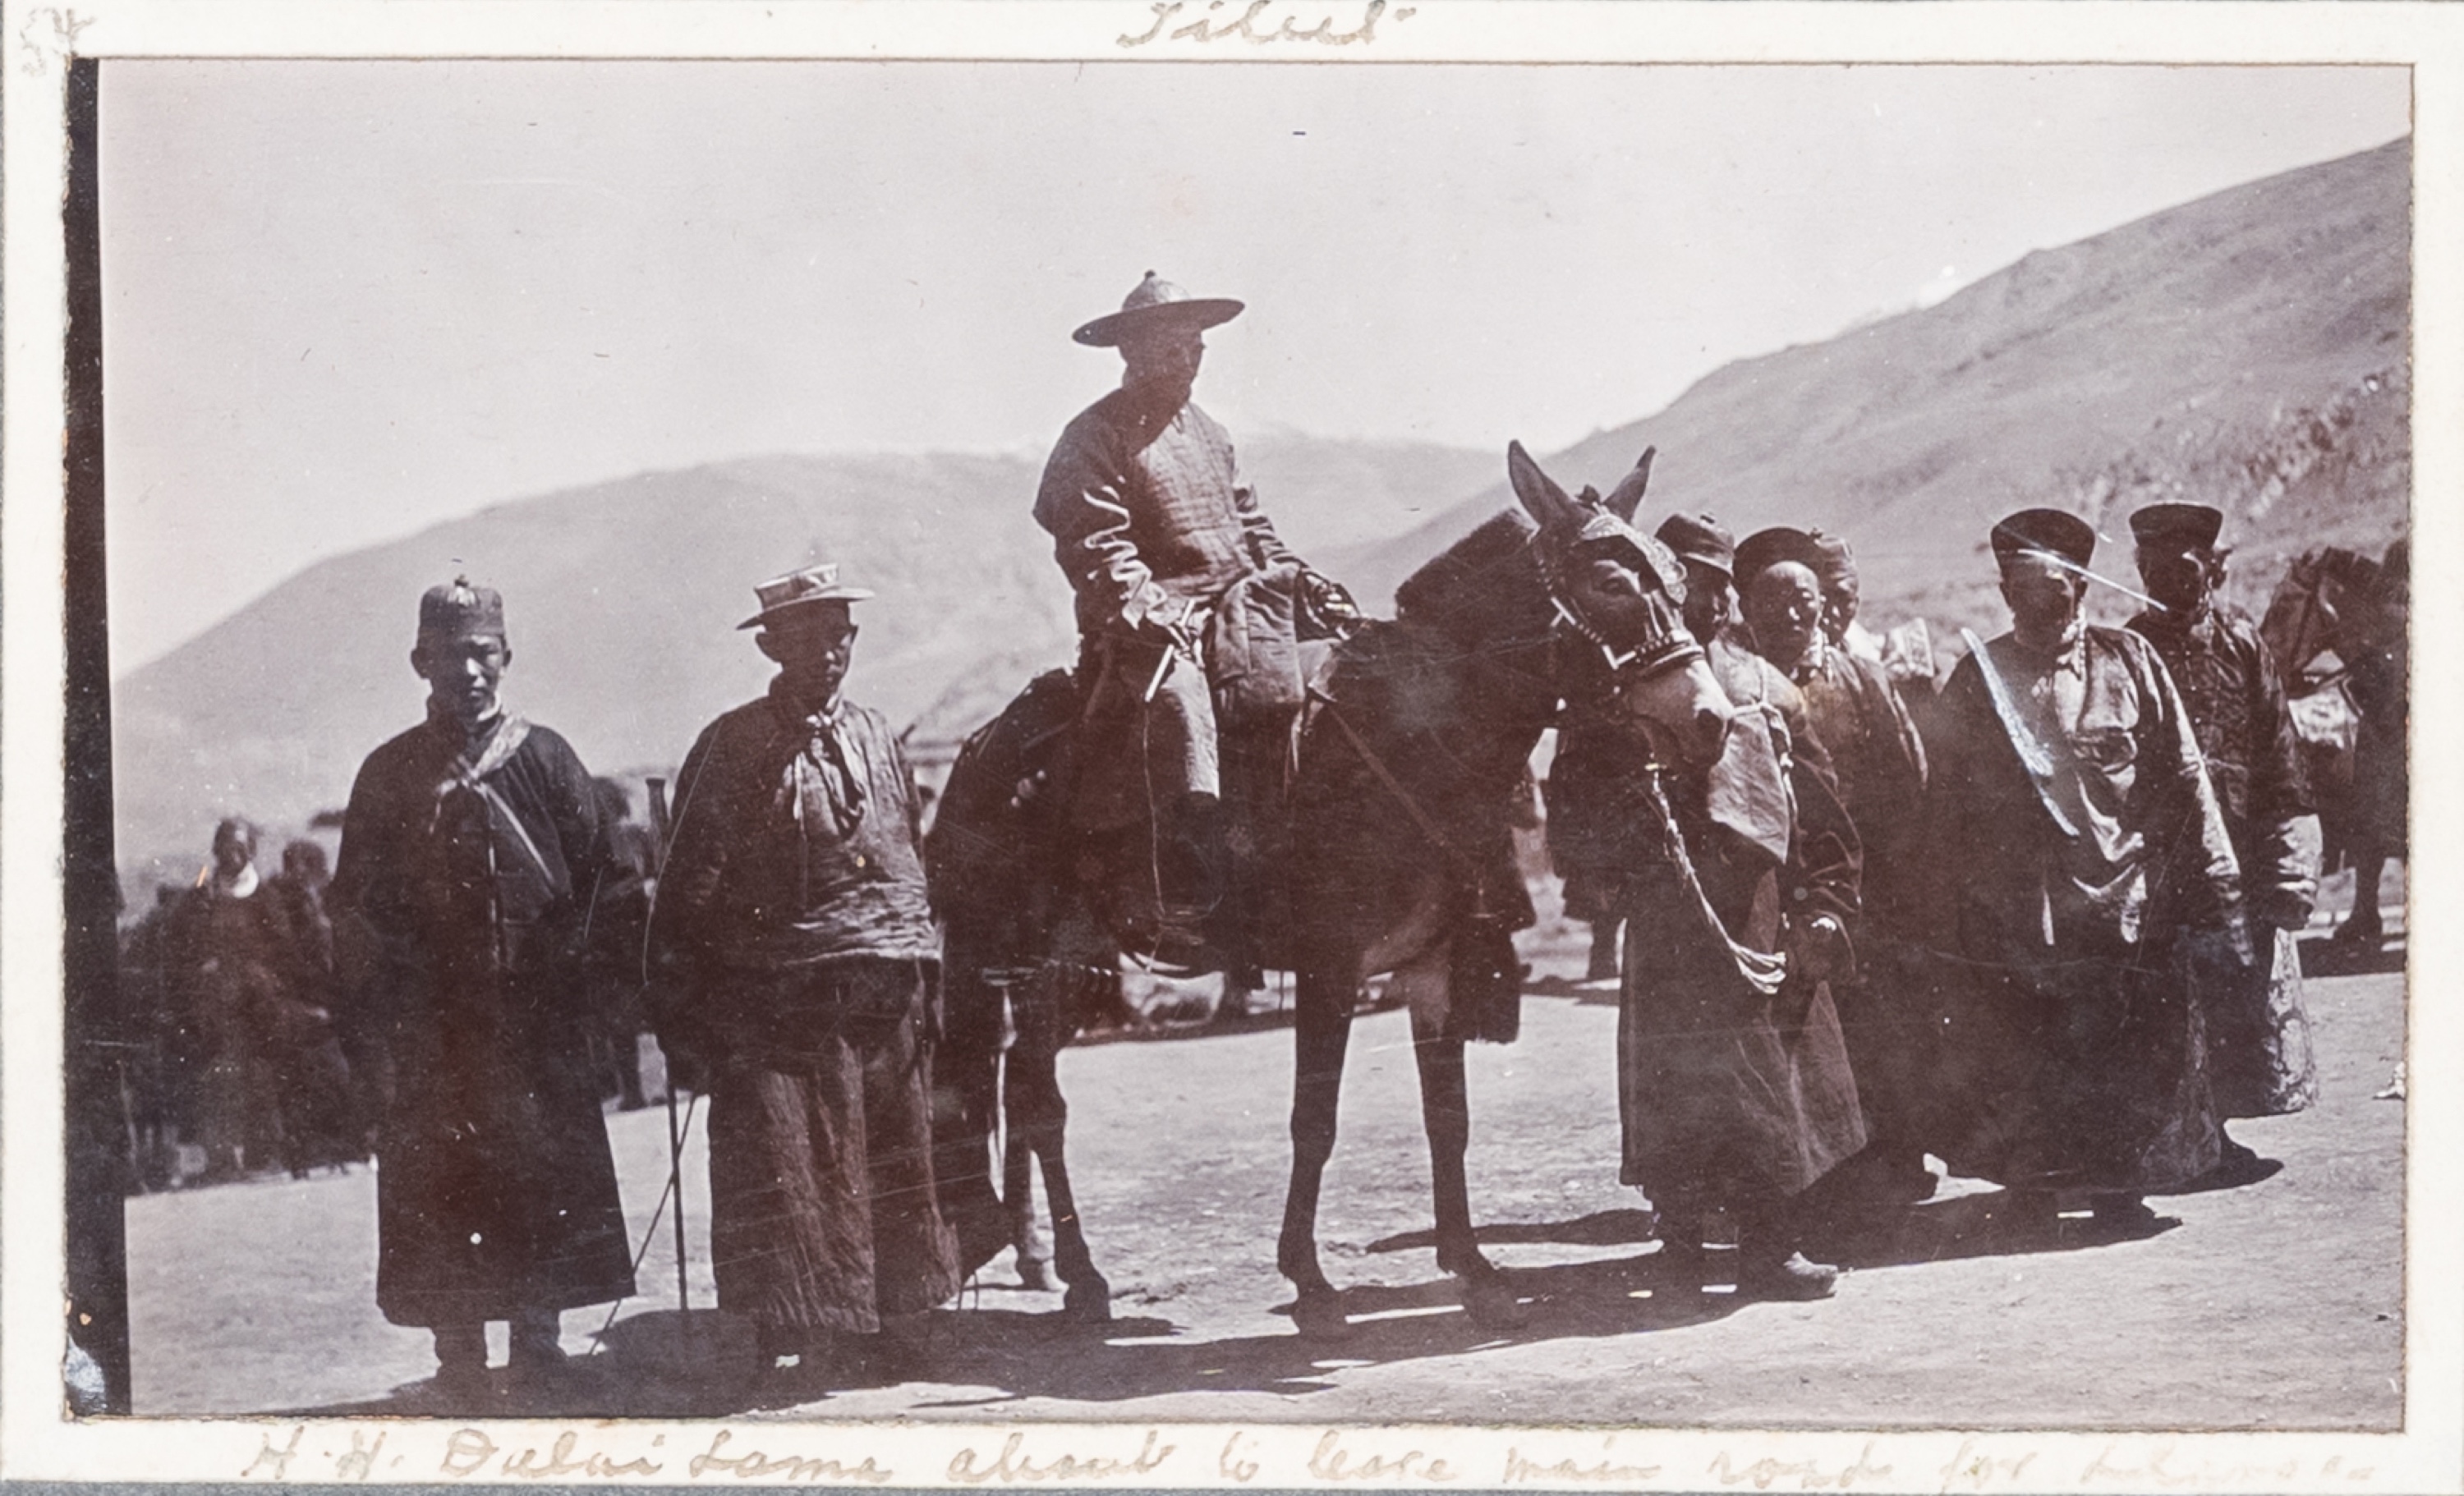 A rare photo album on the 13th Dalai Lama's return from exile from India, ca. 1912/1913 - Image 3 of 21